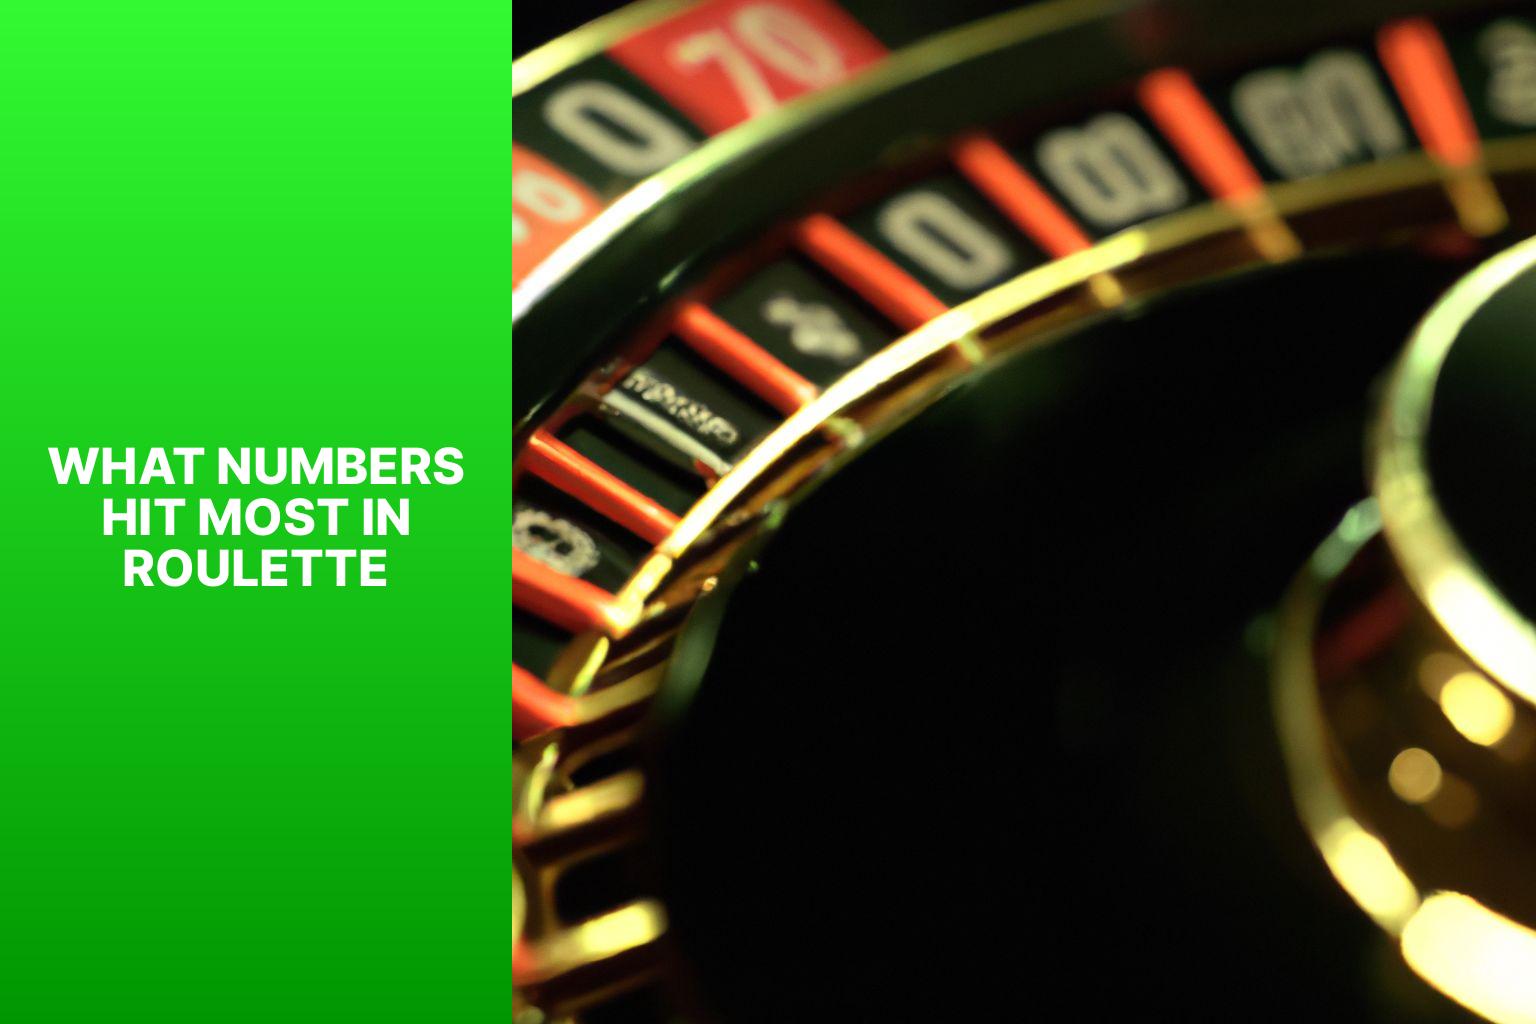 What Numbers Hit Most in Roulette